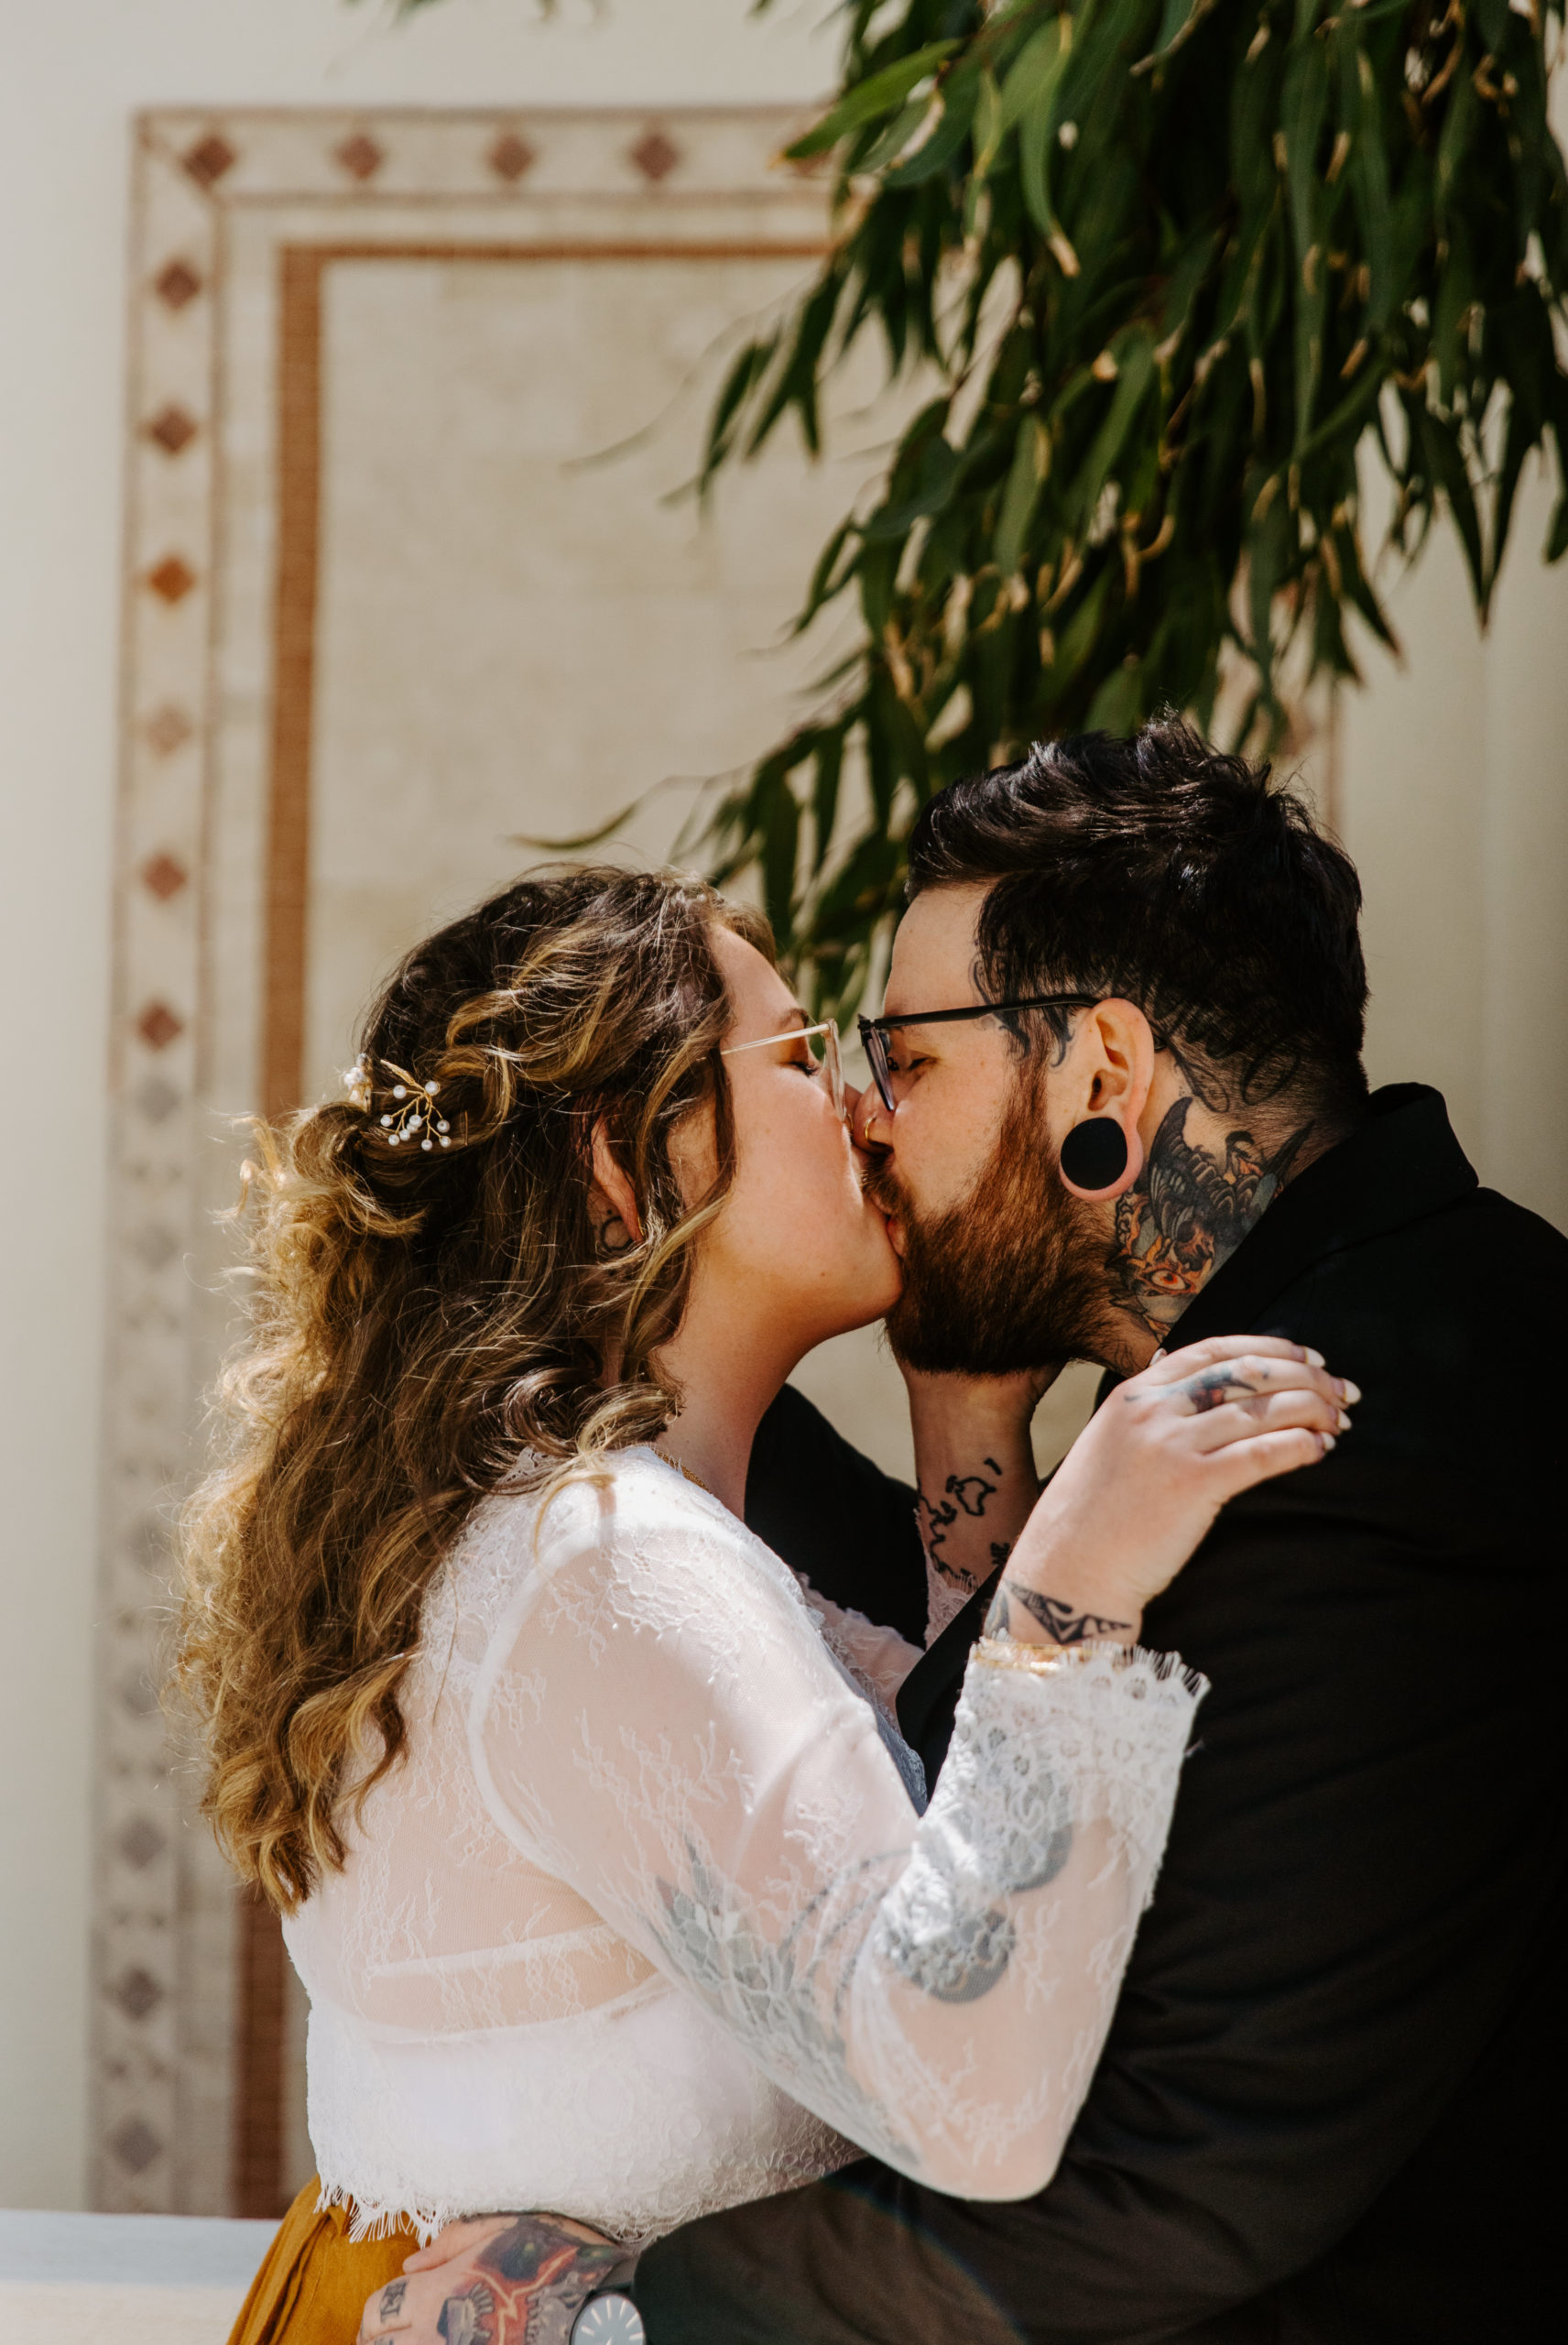 Wedding Couple Kissing on wedding day. They are in San Diego California. Photo by Bare Moments Photography